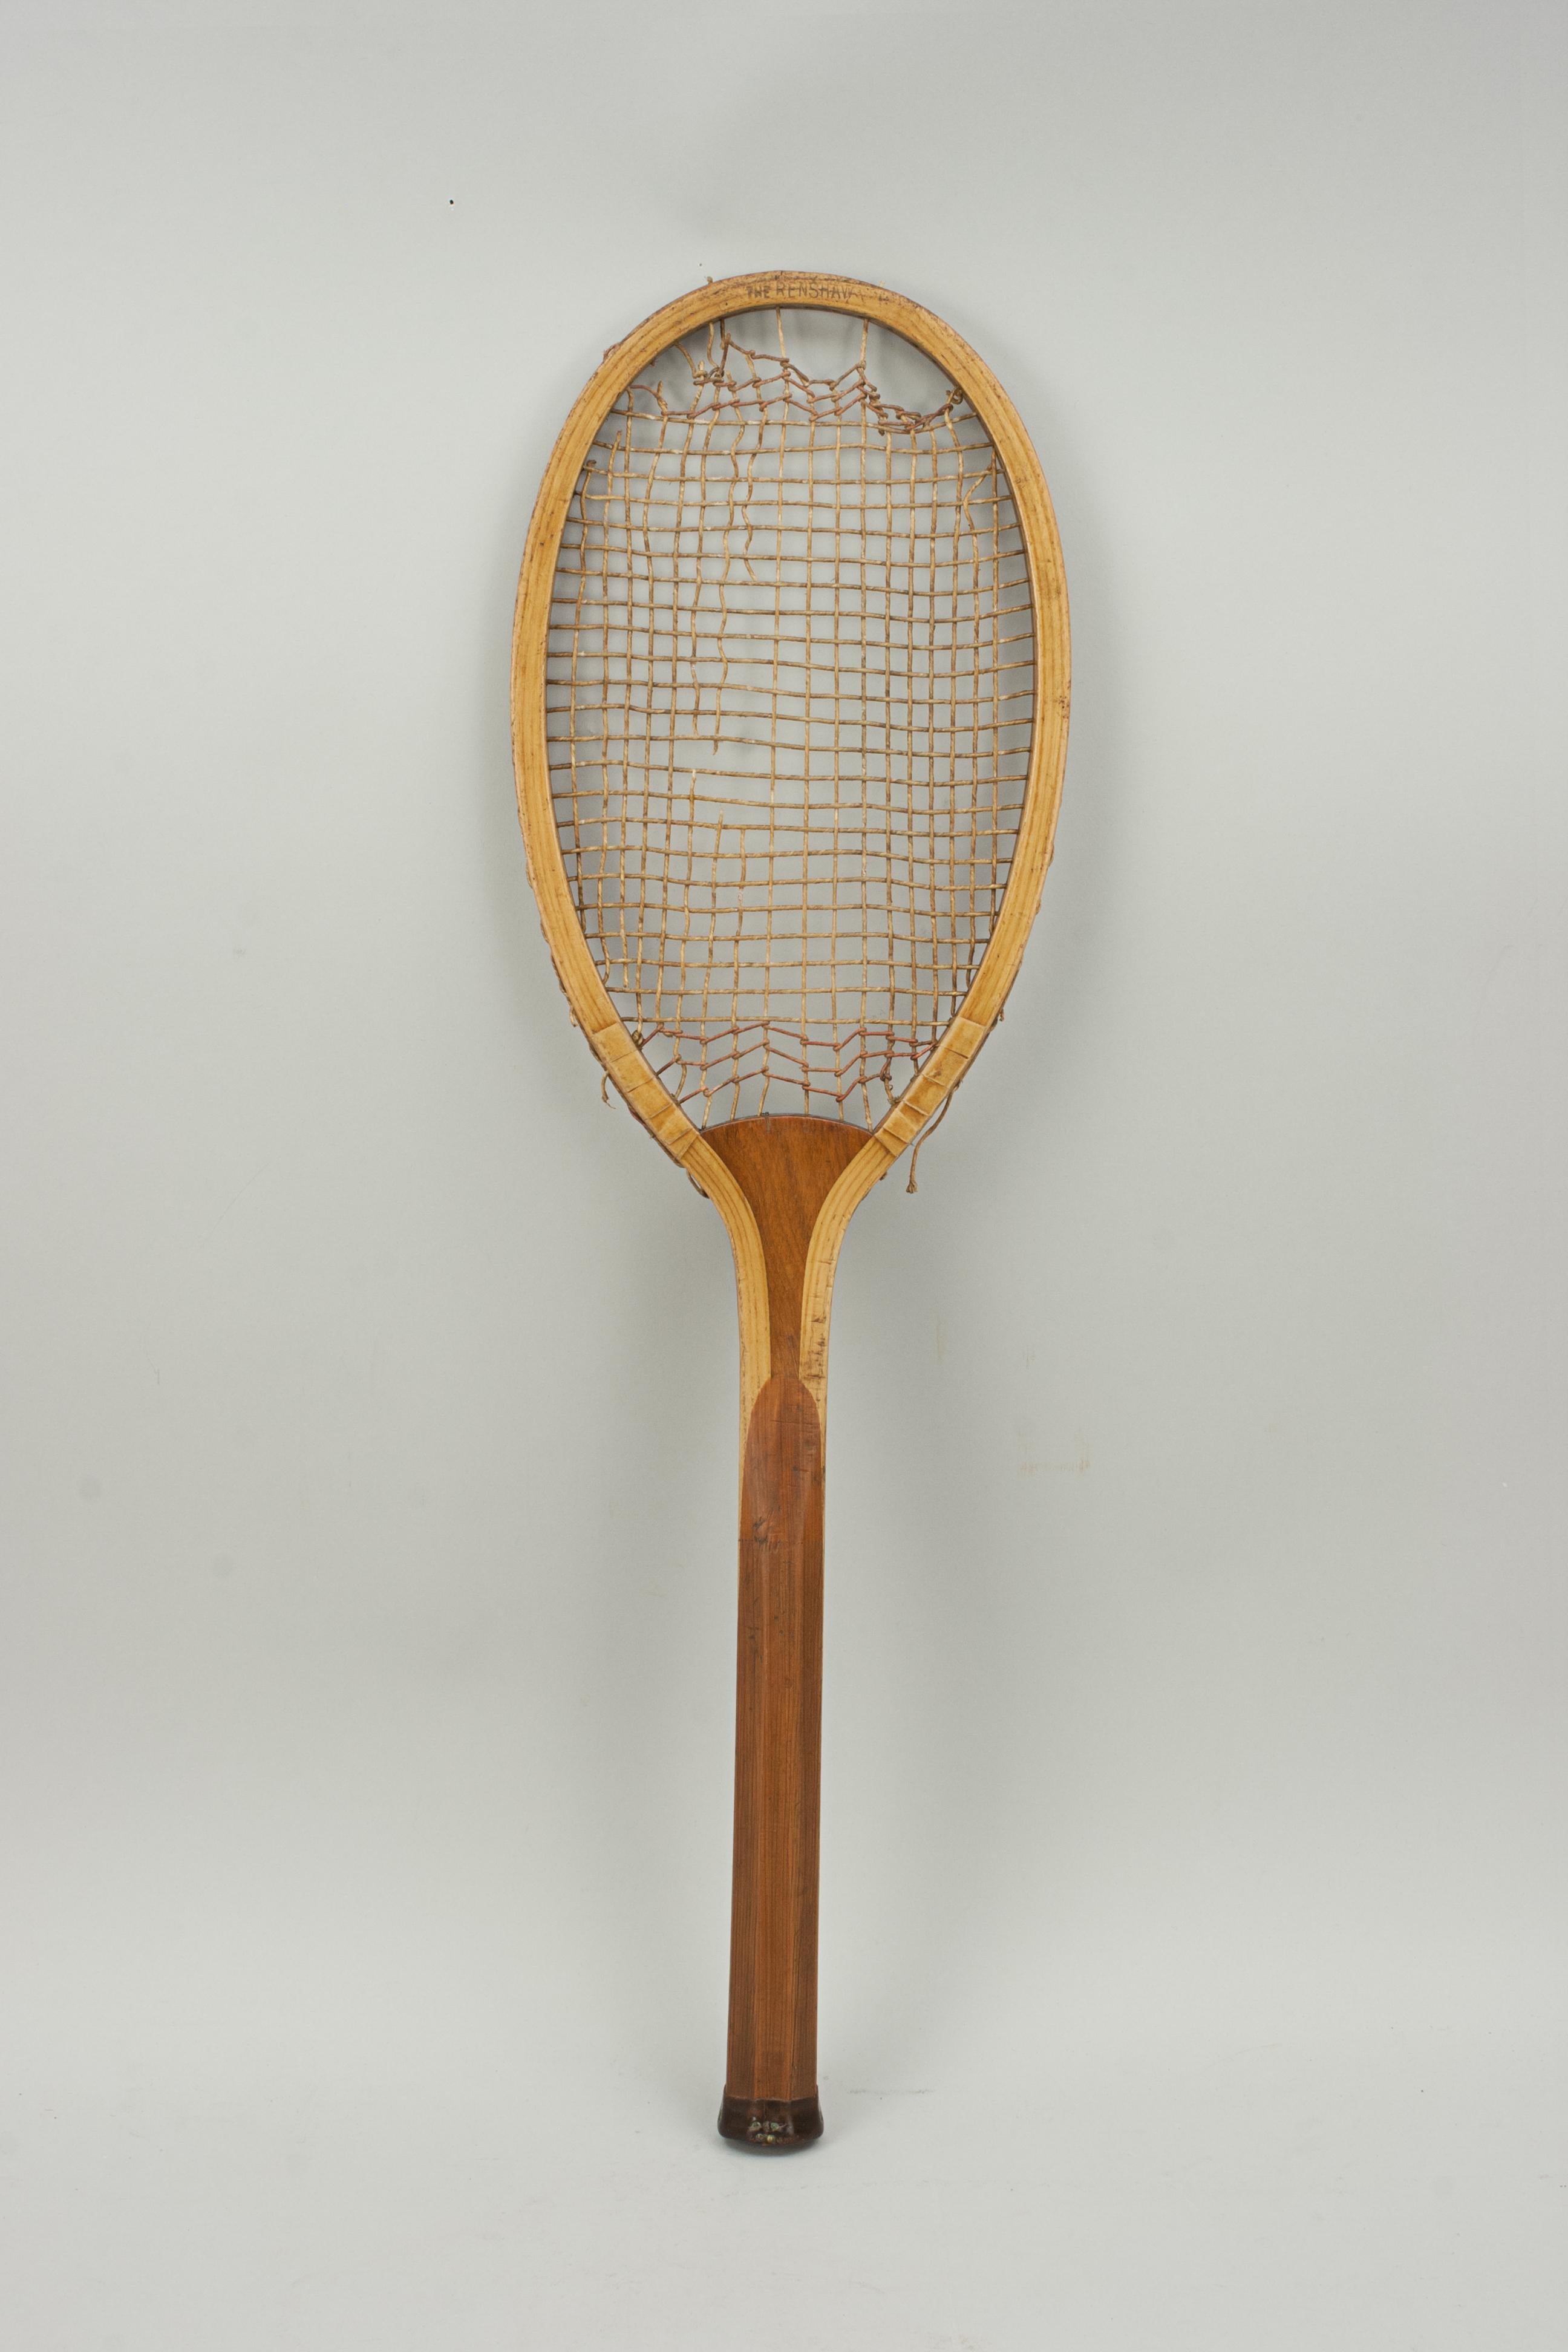 Early wooden lawn tennis racket, the Renshaw.
A Fine example of a long shaped head wooden framed lawn tennis racket. A nice ash framed racket with convex wedge. The walnut wedge is embossed 'The Renshaw' as is the top of the frame. It is known that